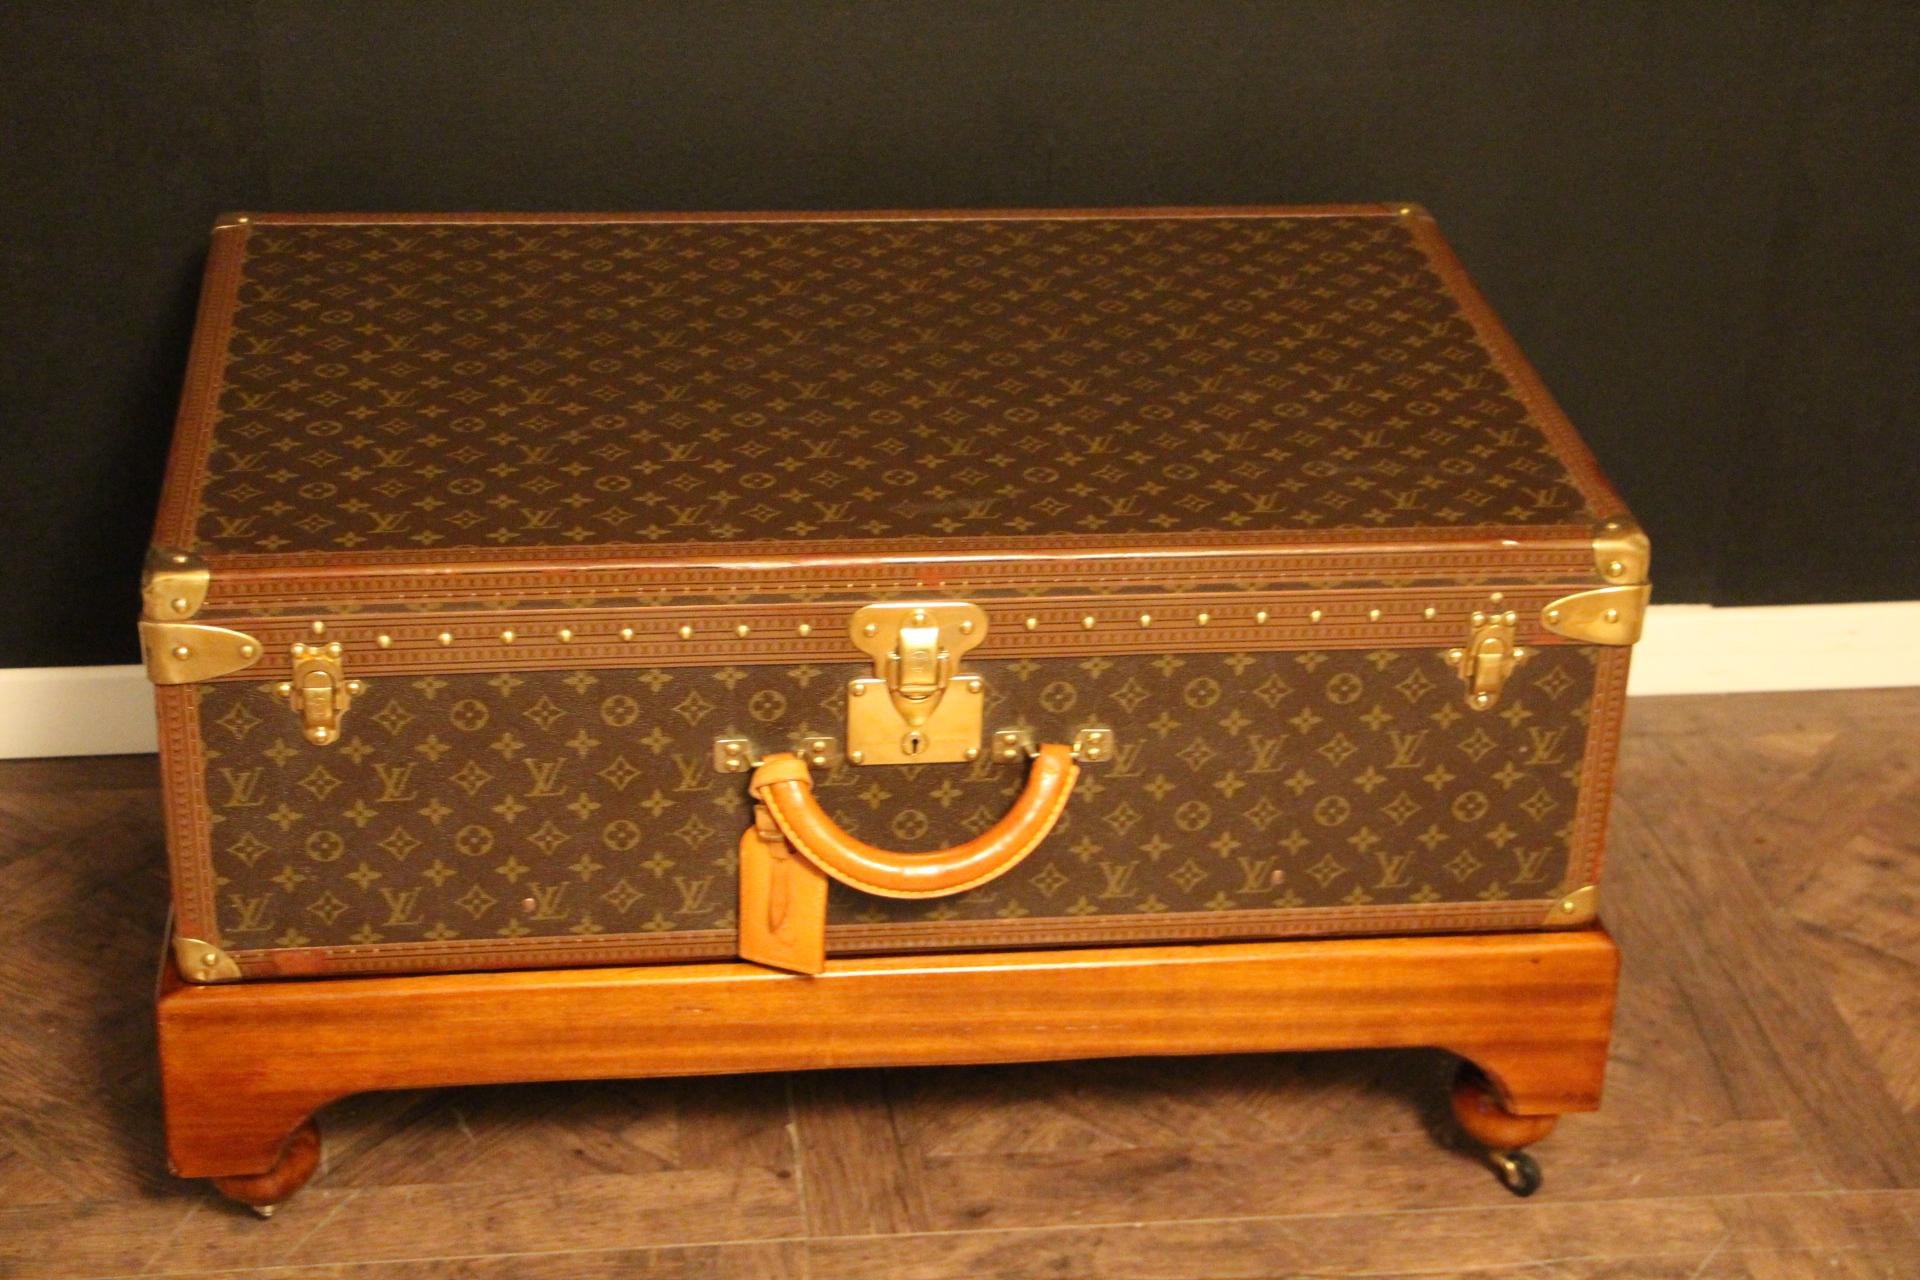 Magnificent Louis Vuitton Alzer monogramm suitcase. This 80 cm suitcase is the largest one made by Louis Vuitton. All Louis Vuitton stamped solid brass fittings: locks, clasps and studs. It comes with its original LV leather name holder. Very nice